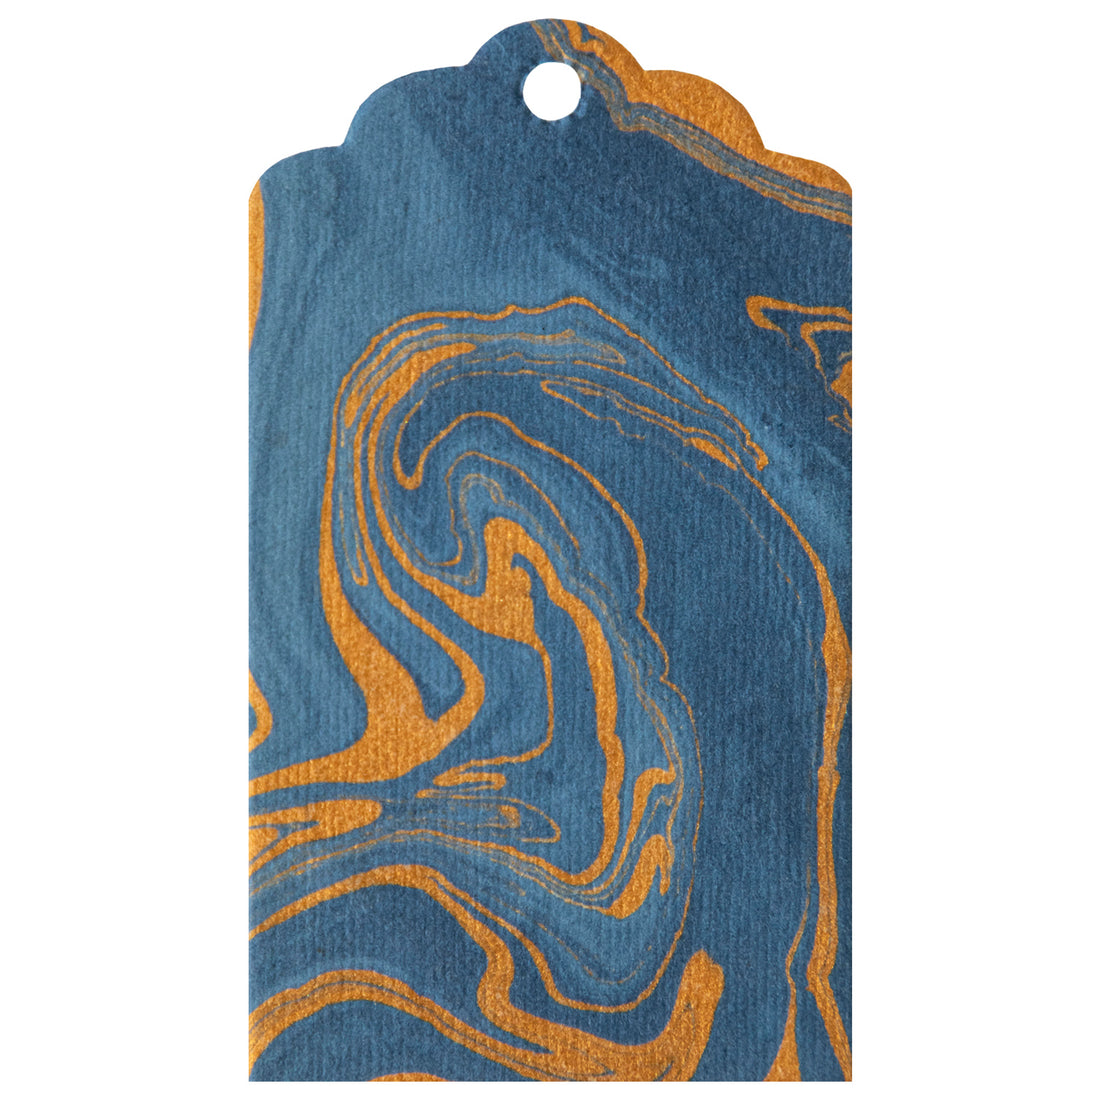 A handmade Vein Marbled Gift Tag made from unique papers by Hester &amp; Cook.